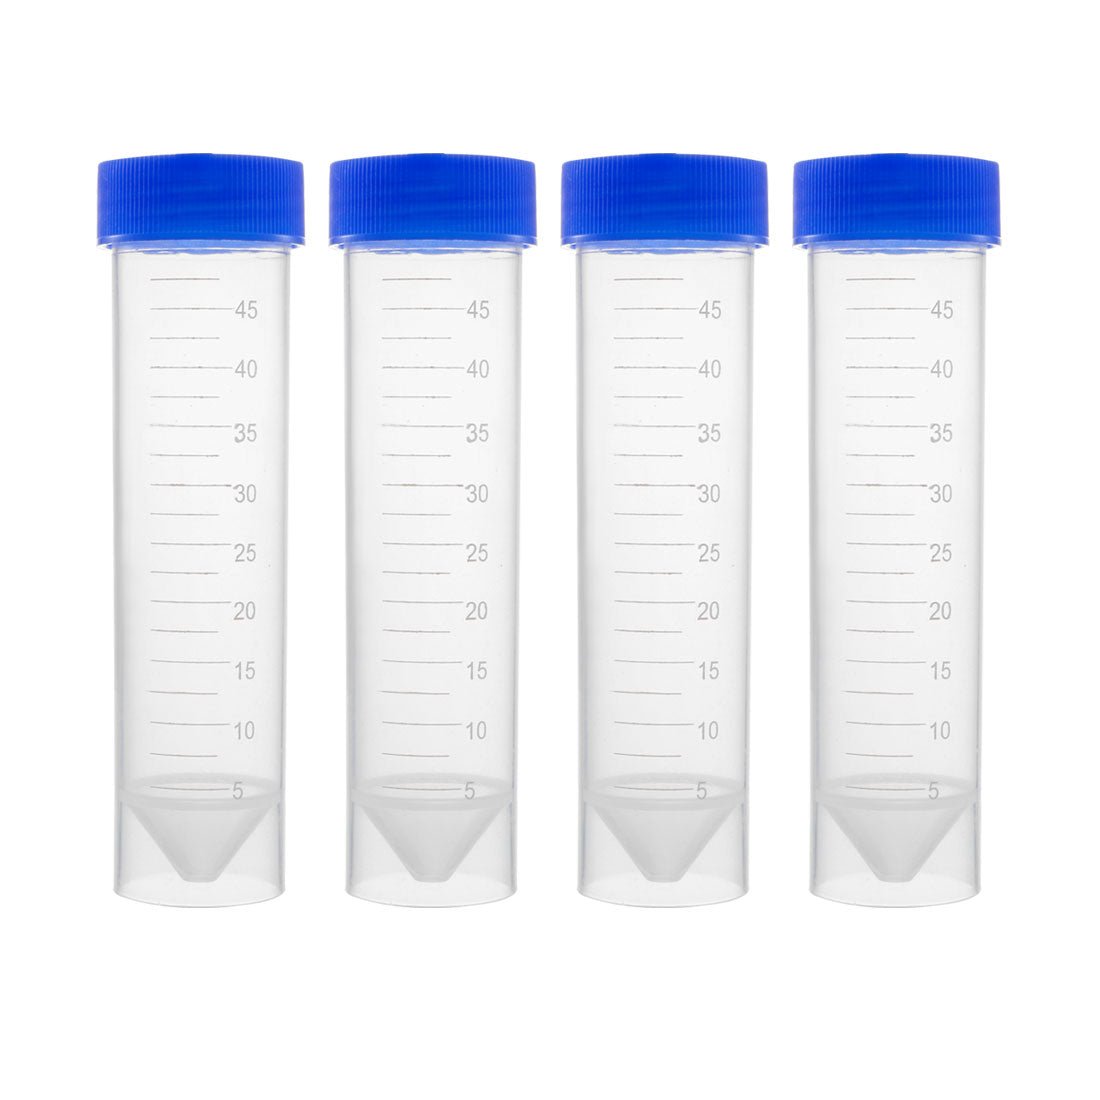 uxcell Uxcell 10 Pcs 45ml Plastic Centrifuge Tubes with Blue Screw Cap, Conical Bottom, Self Standing， Graduated Marks